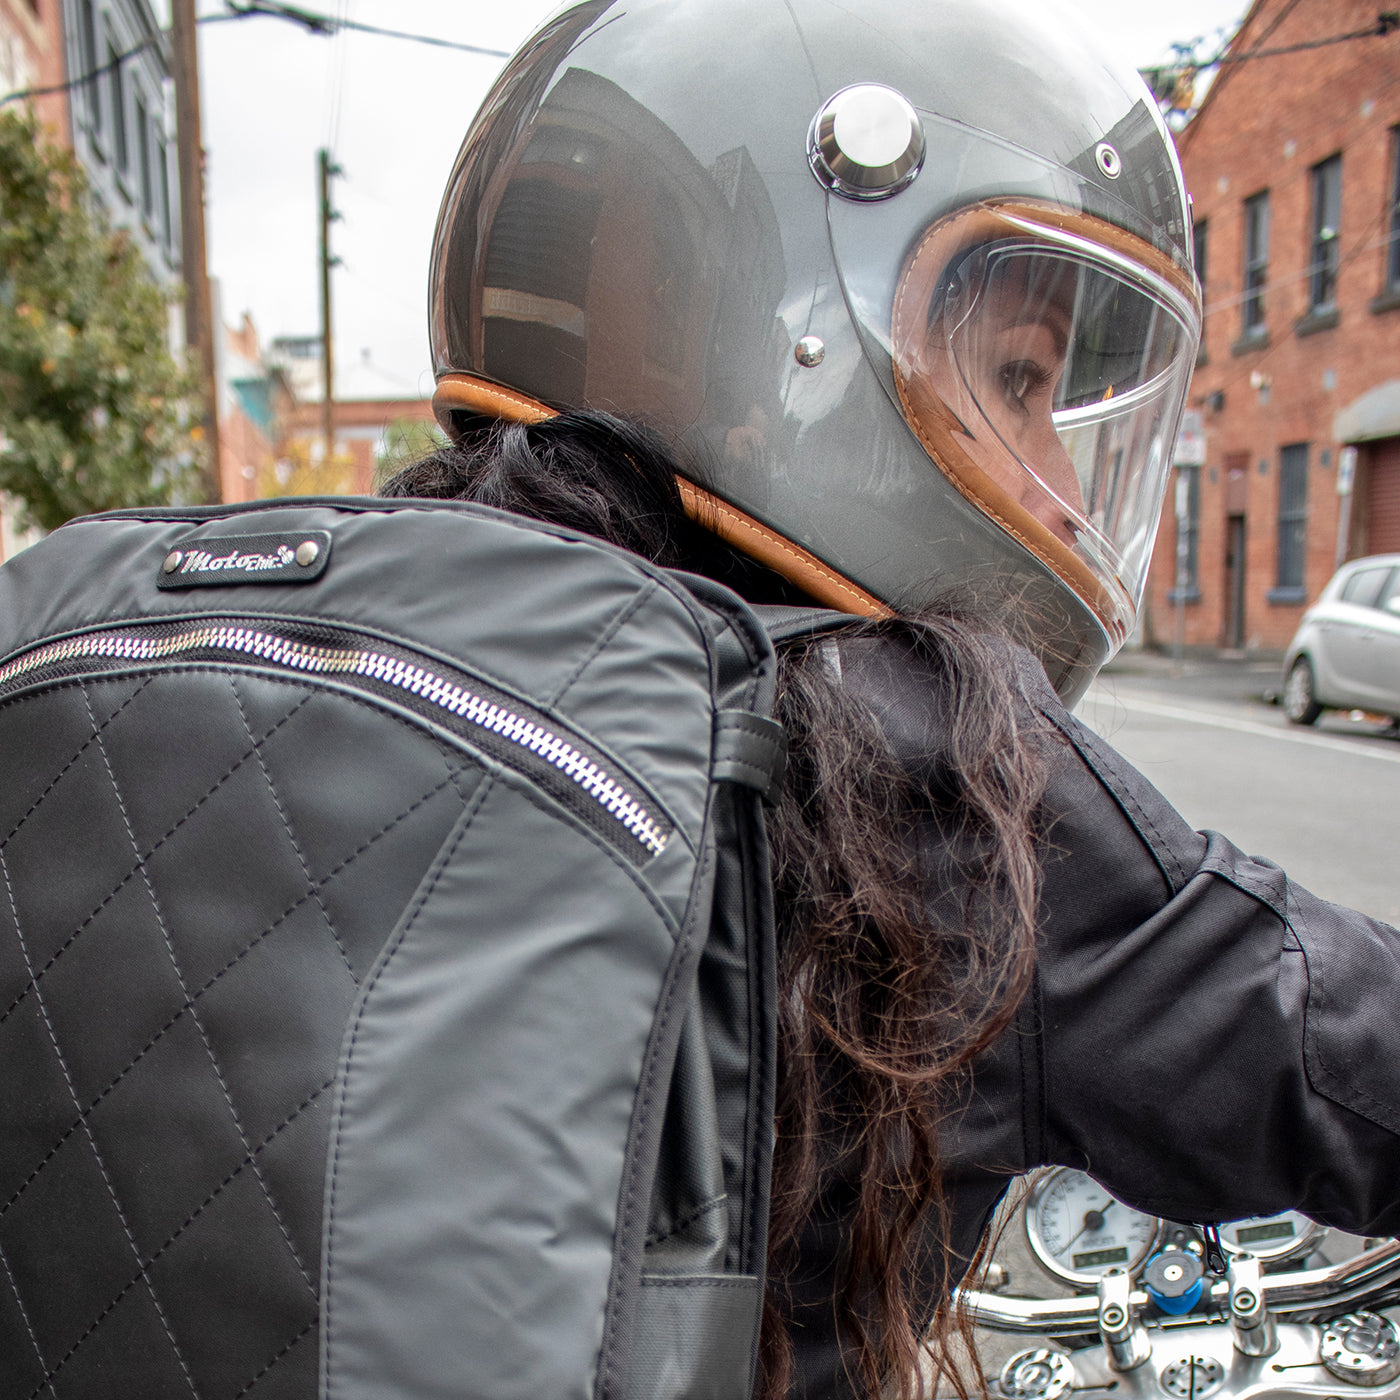 6 Motorcycle Items To Keep You Warm This Winter